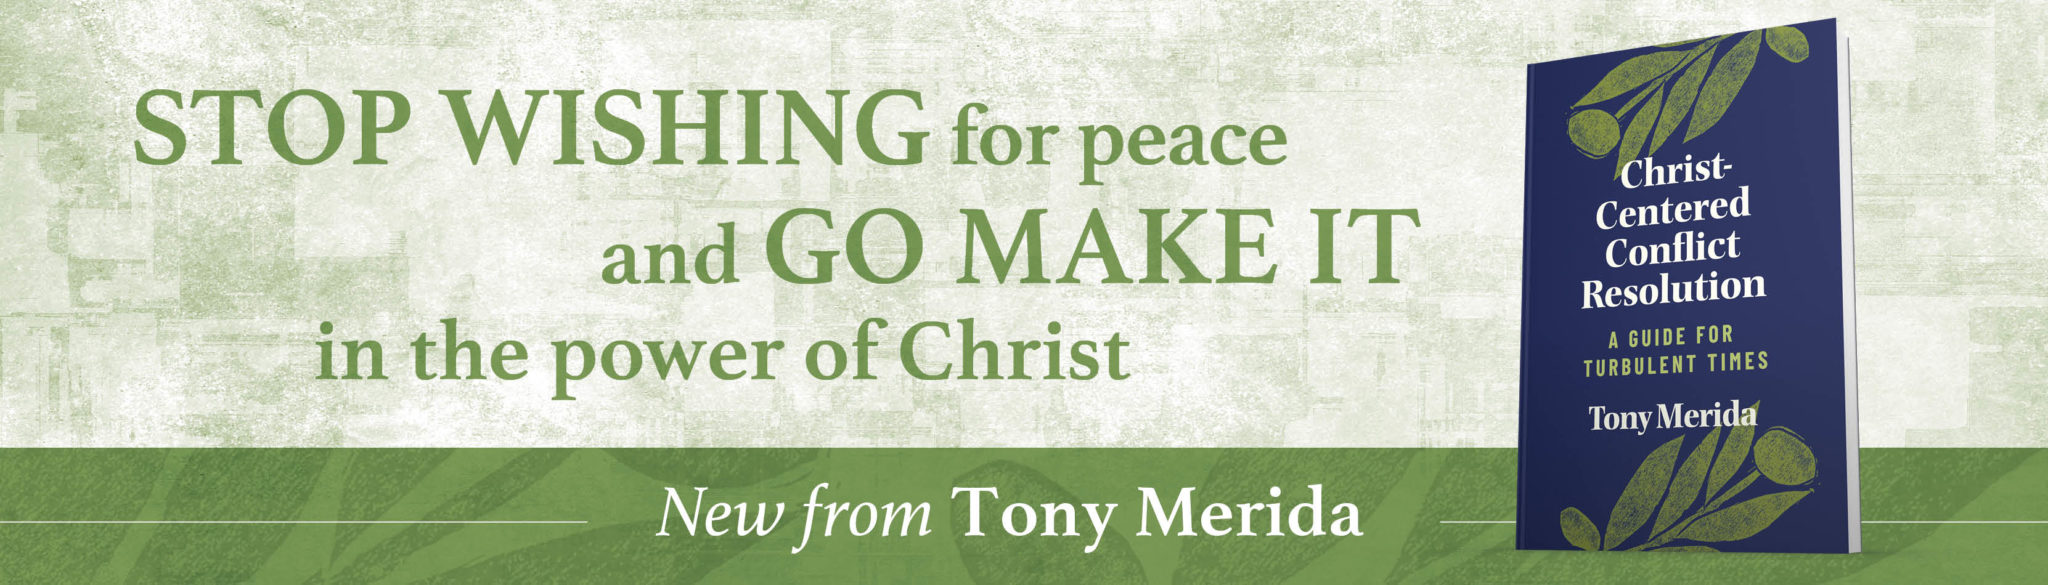 Stop wishing for peace and go make it in the power of Christ. New from Tony Merida